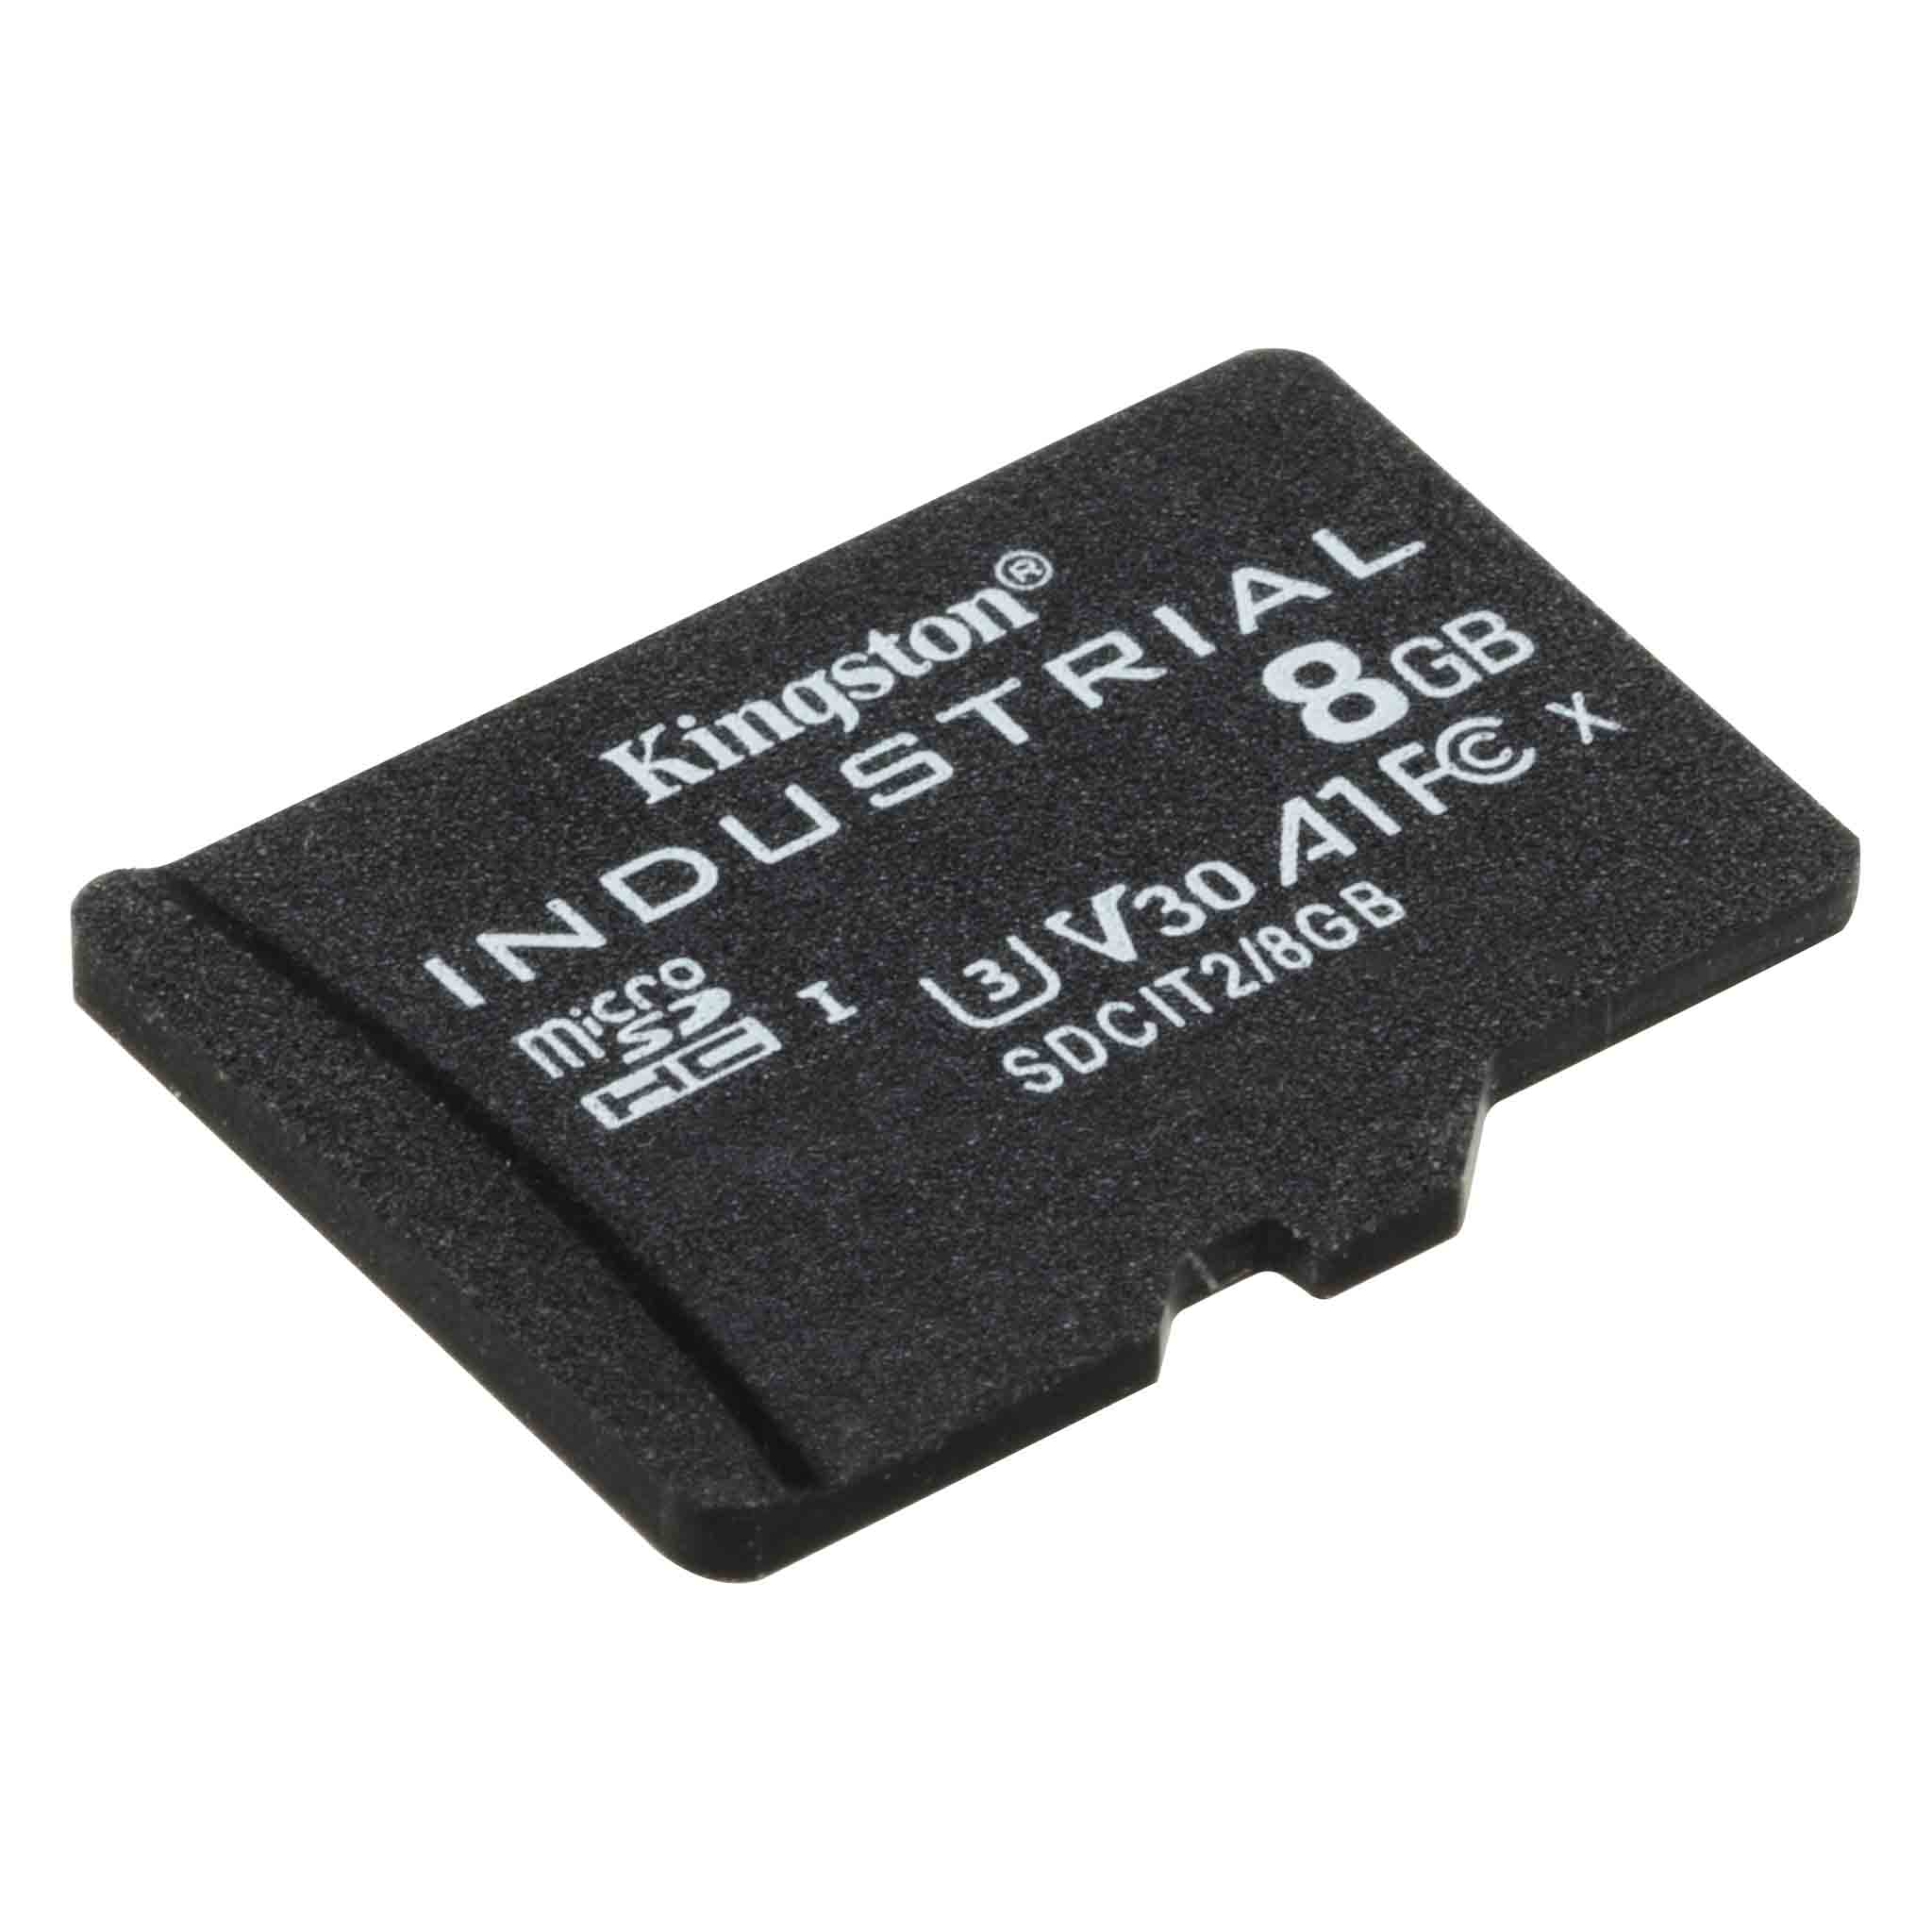 Kingston Industrial Grade 8GB GoPro New Hero MicroSDHC Card Verified by SanFlash. 90MBs Works for Kingston 